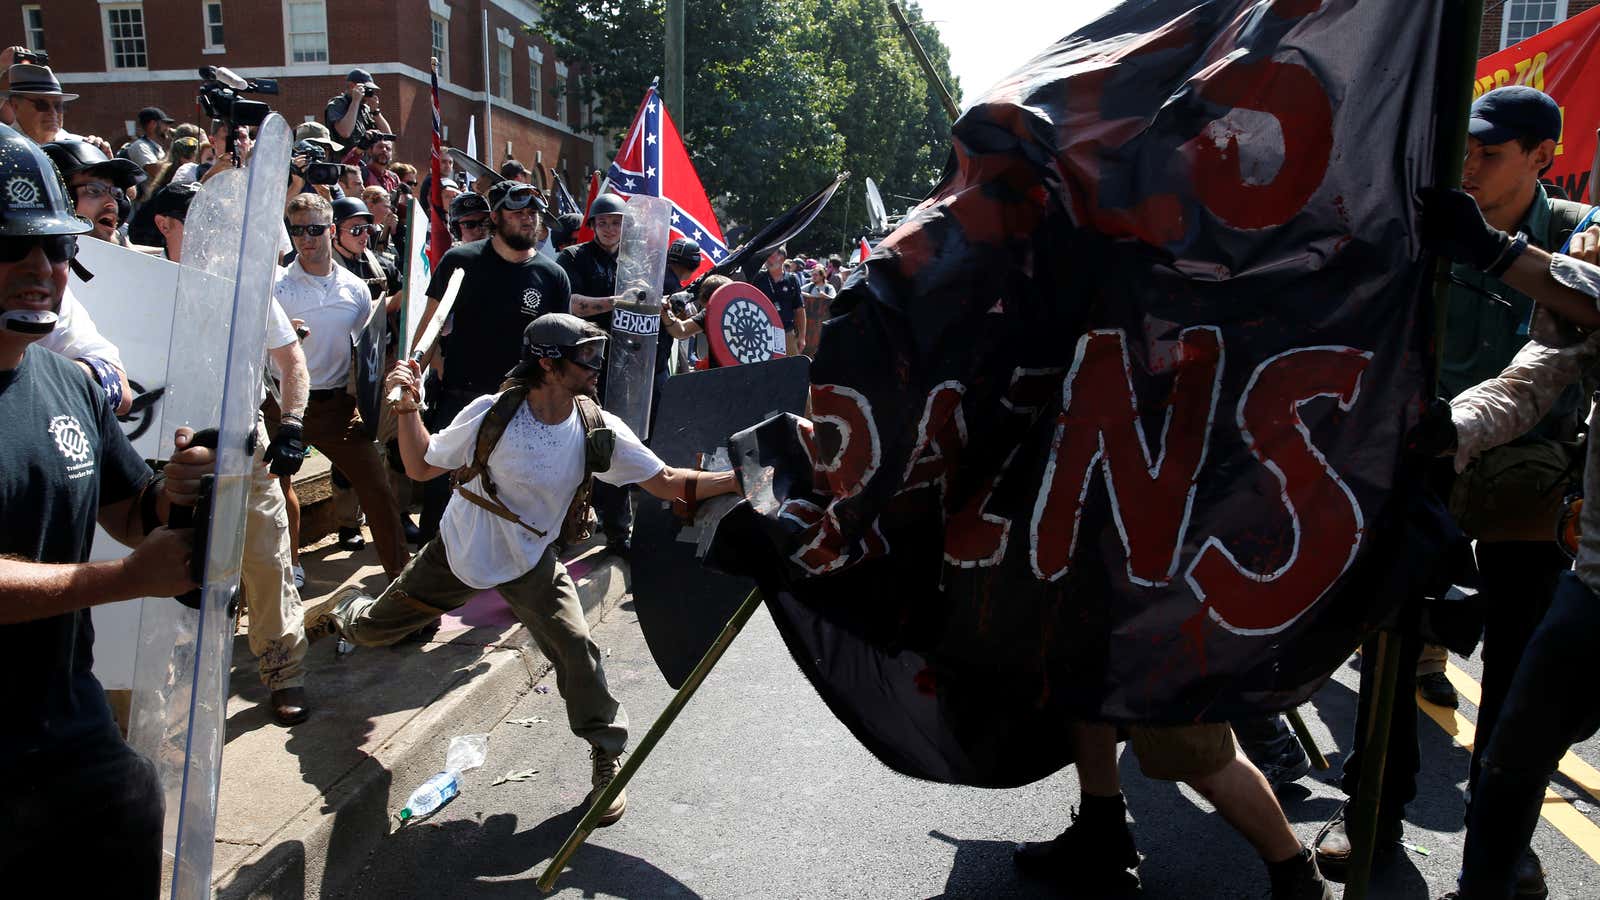 Members of white nationalists clash against a group of counterprotesters in Charlottesville.